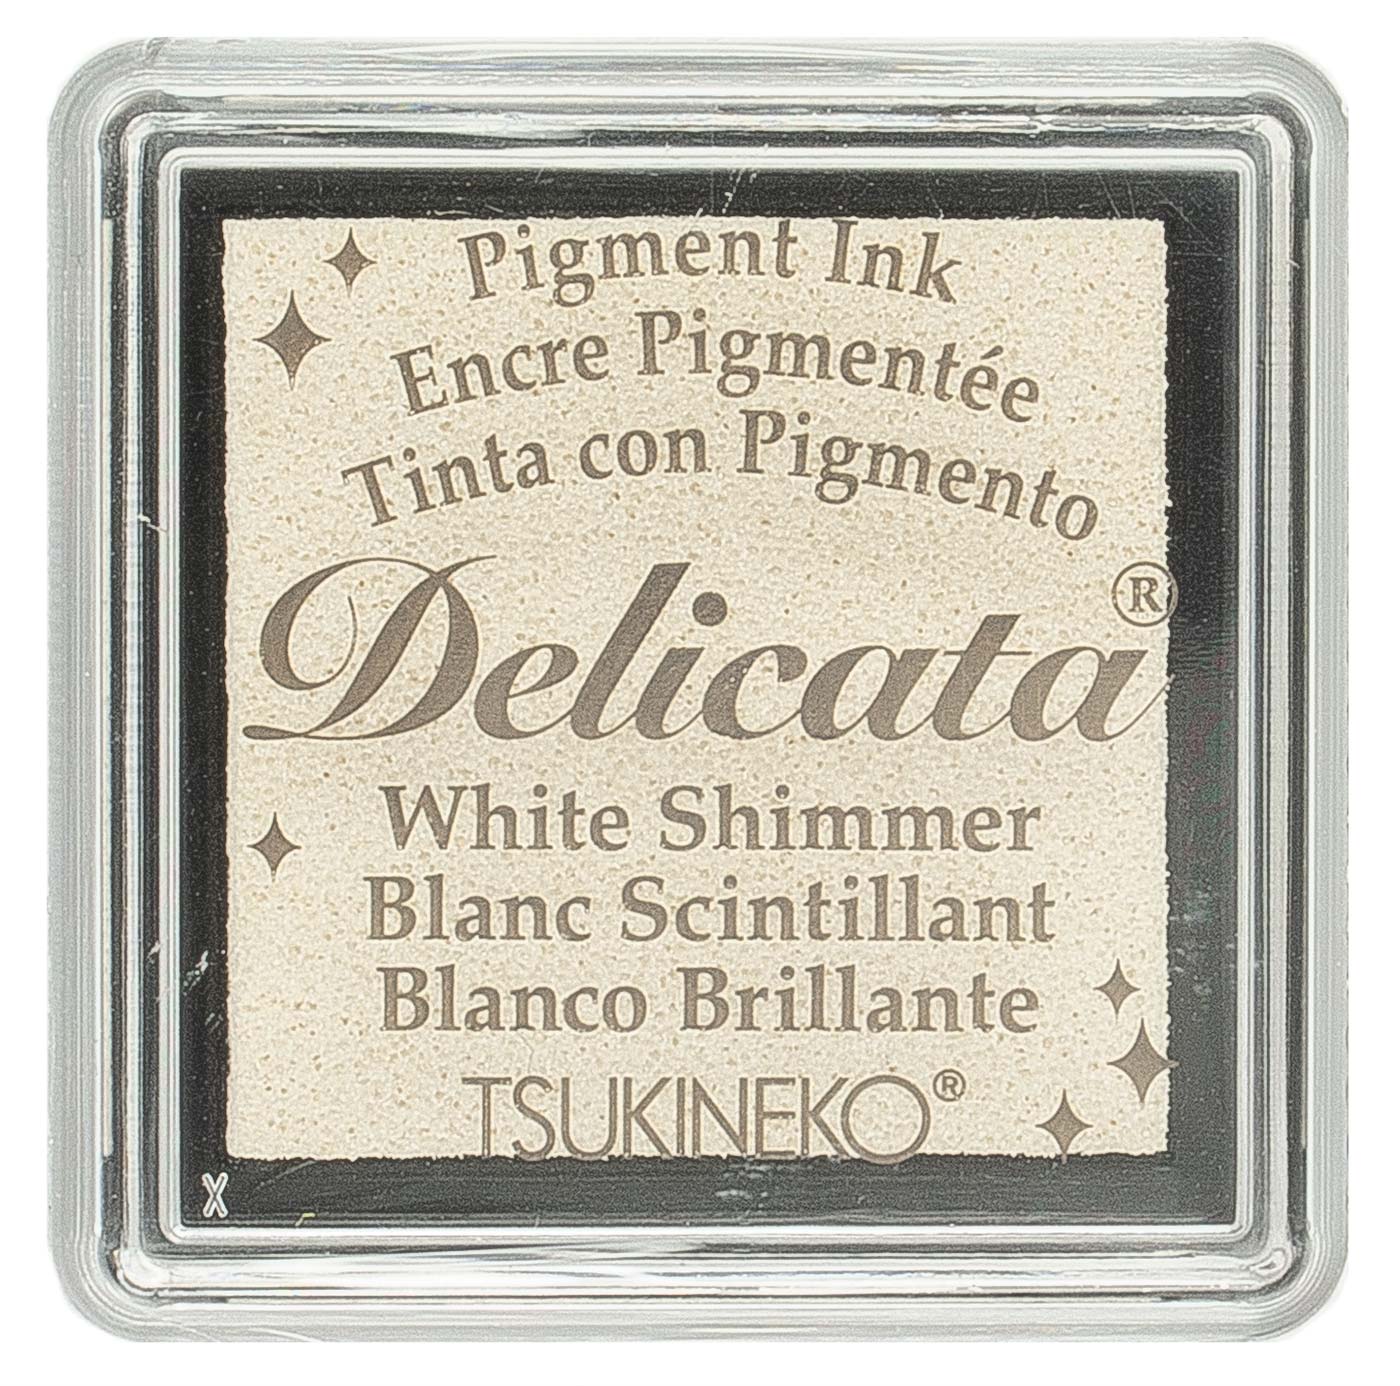 Global Solutions Metallic White Shimmer Stamp Pad